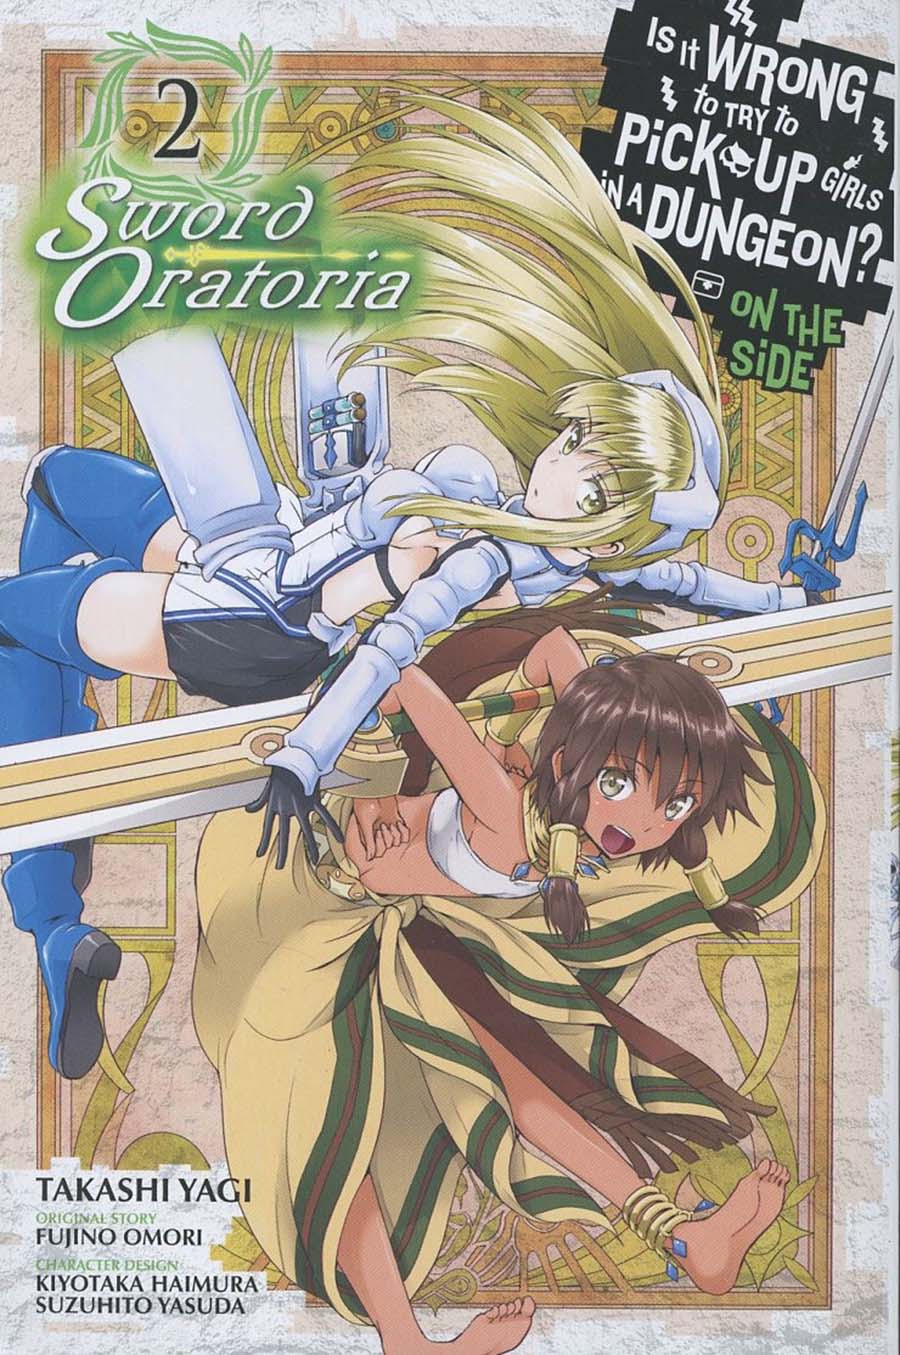 Is It Wrong To Try To Pick Up Girls In A Dungeon On The Side Sword Oratoria Vol 2 GN